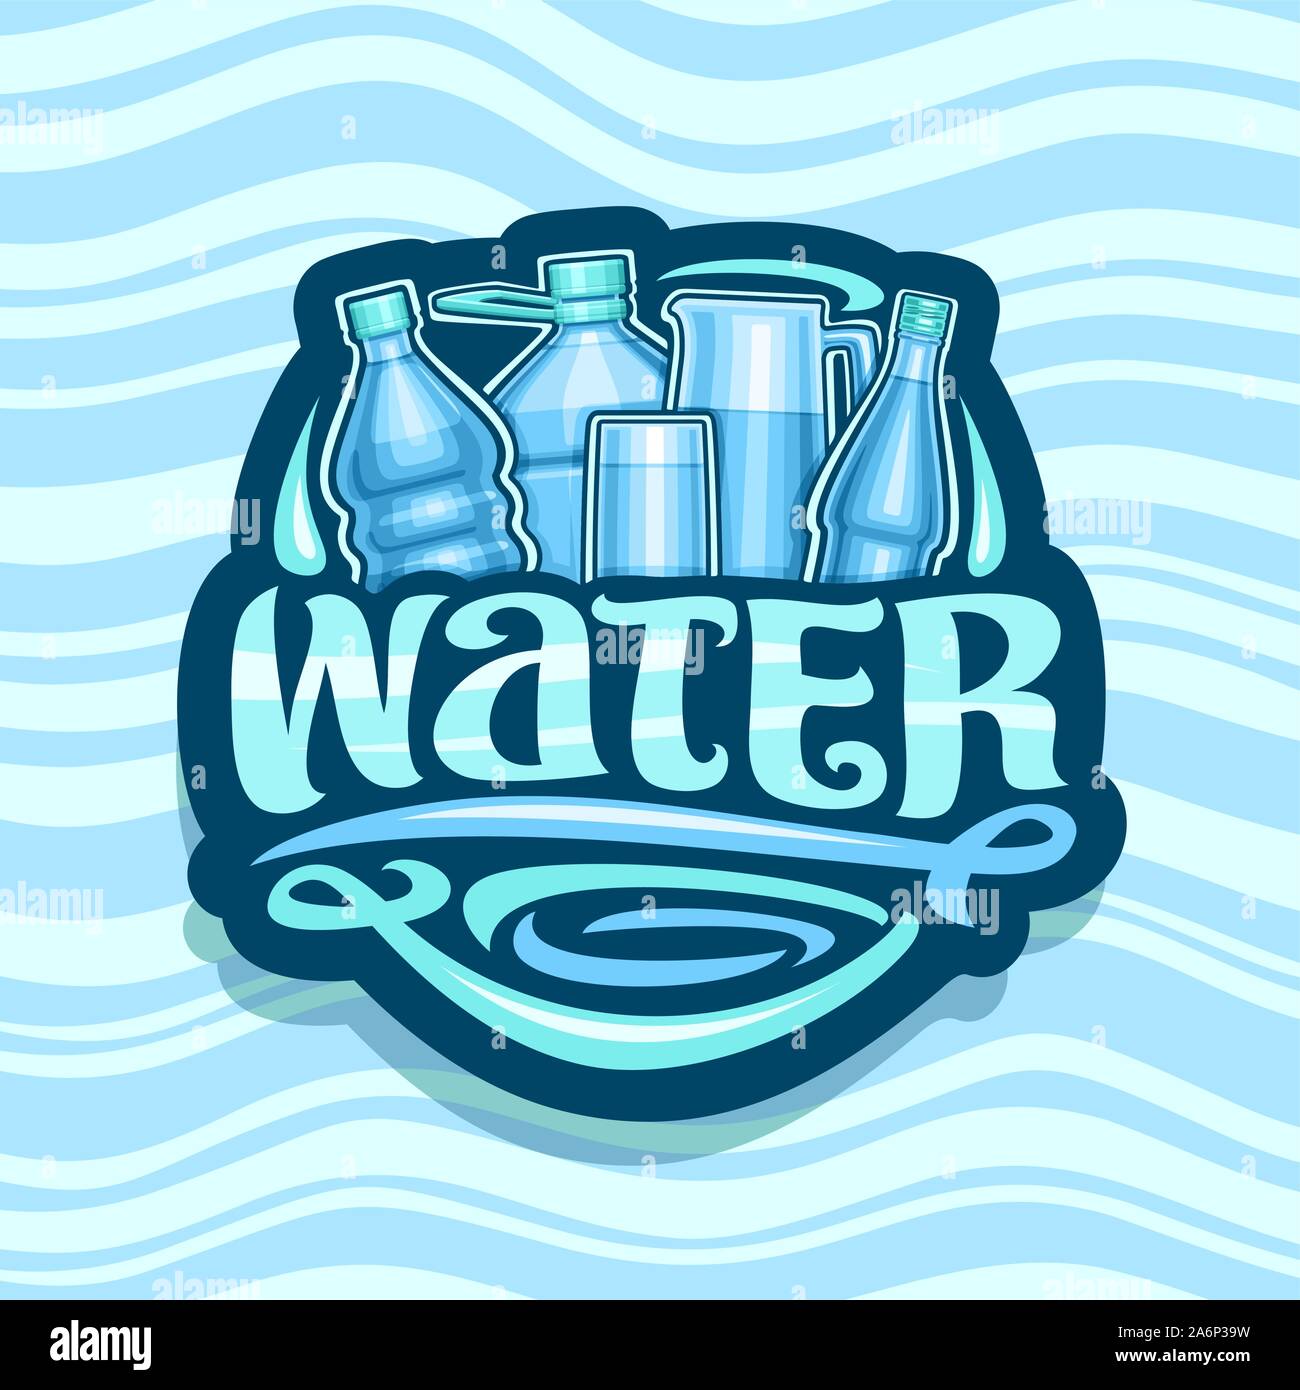 https://c8.alamy.com/comp/2A6P39W/vector-logo-for-drinking-water-blue-icon-with-various-glass-and-plastic-bottles-full-cup-and-transparent-pitcher-original-brush-lettering-for-word-2A6P39W.jpg